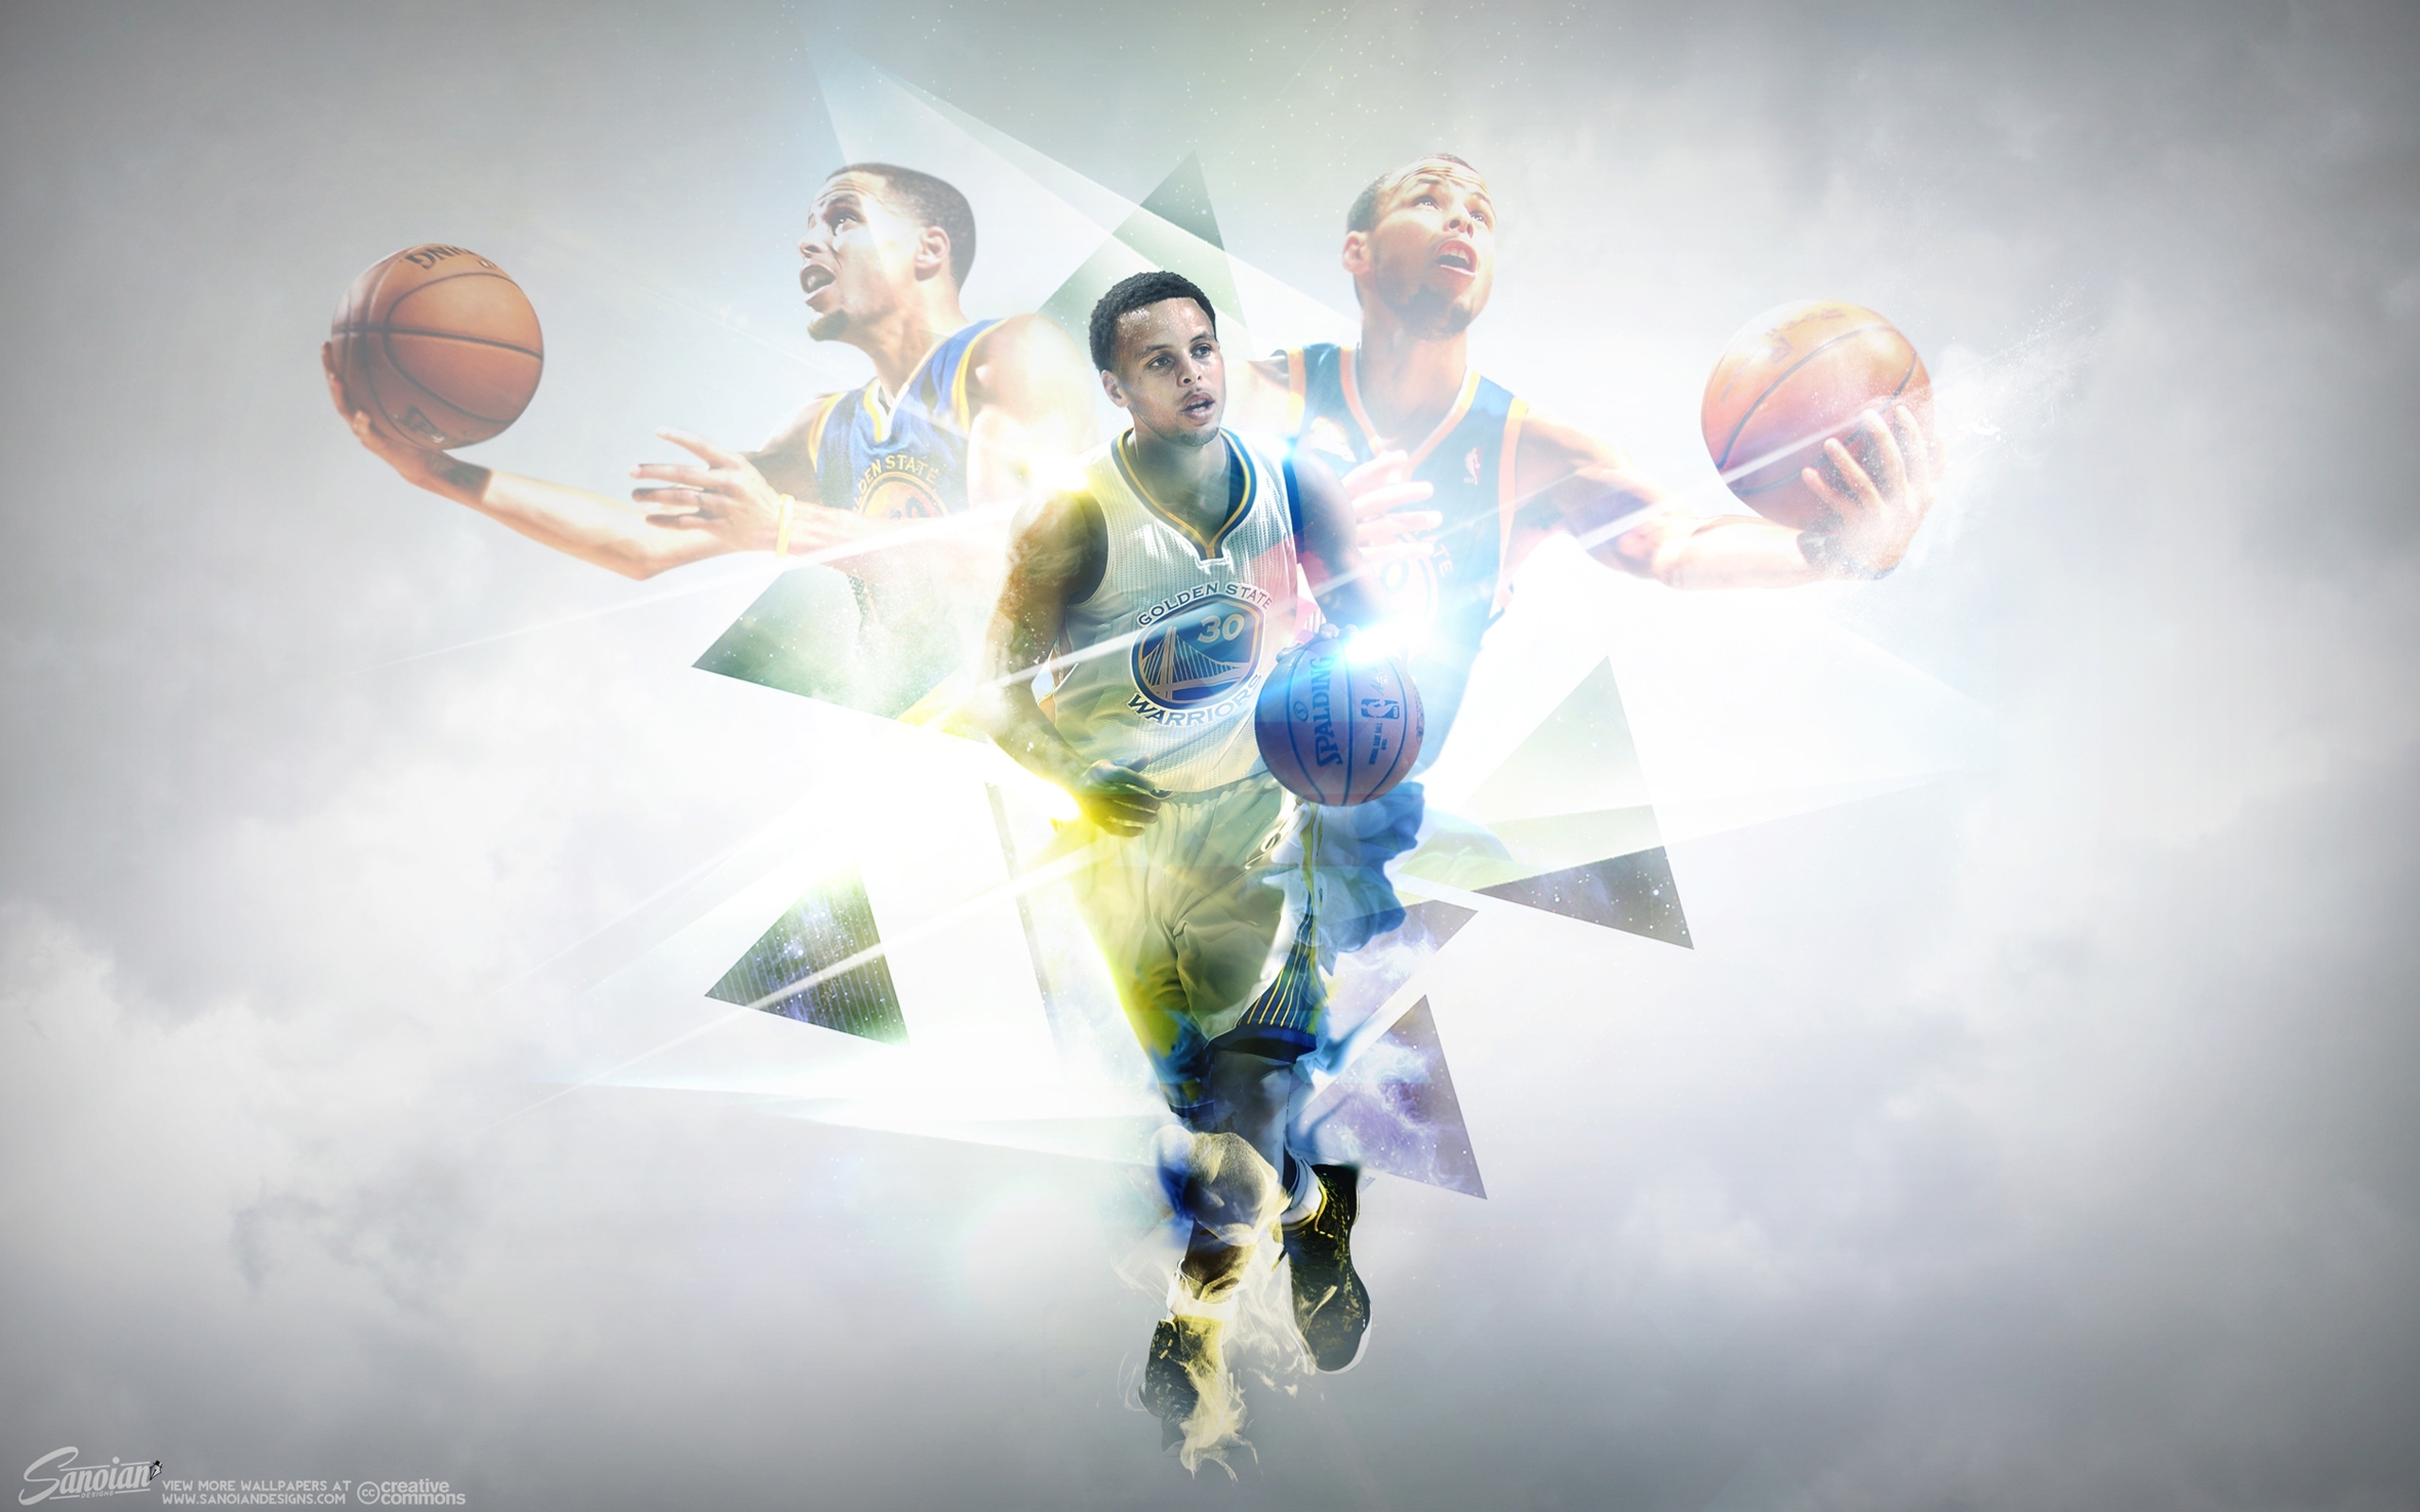 10 Top Stephen Curry 2016 Wallpaper FULL HD 1080p For PC Desktop